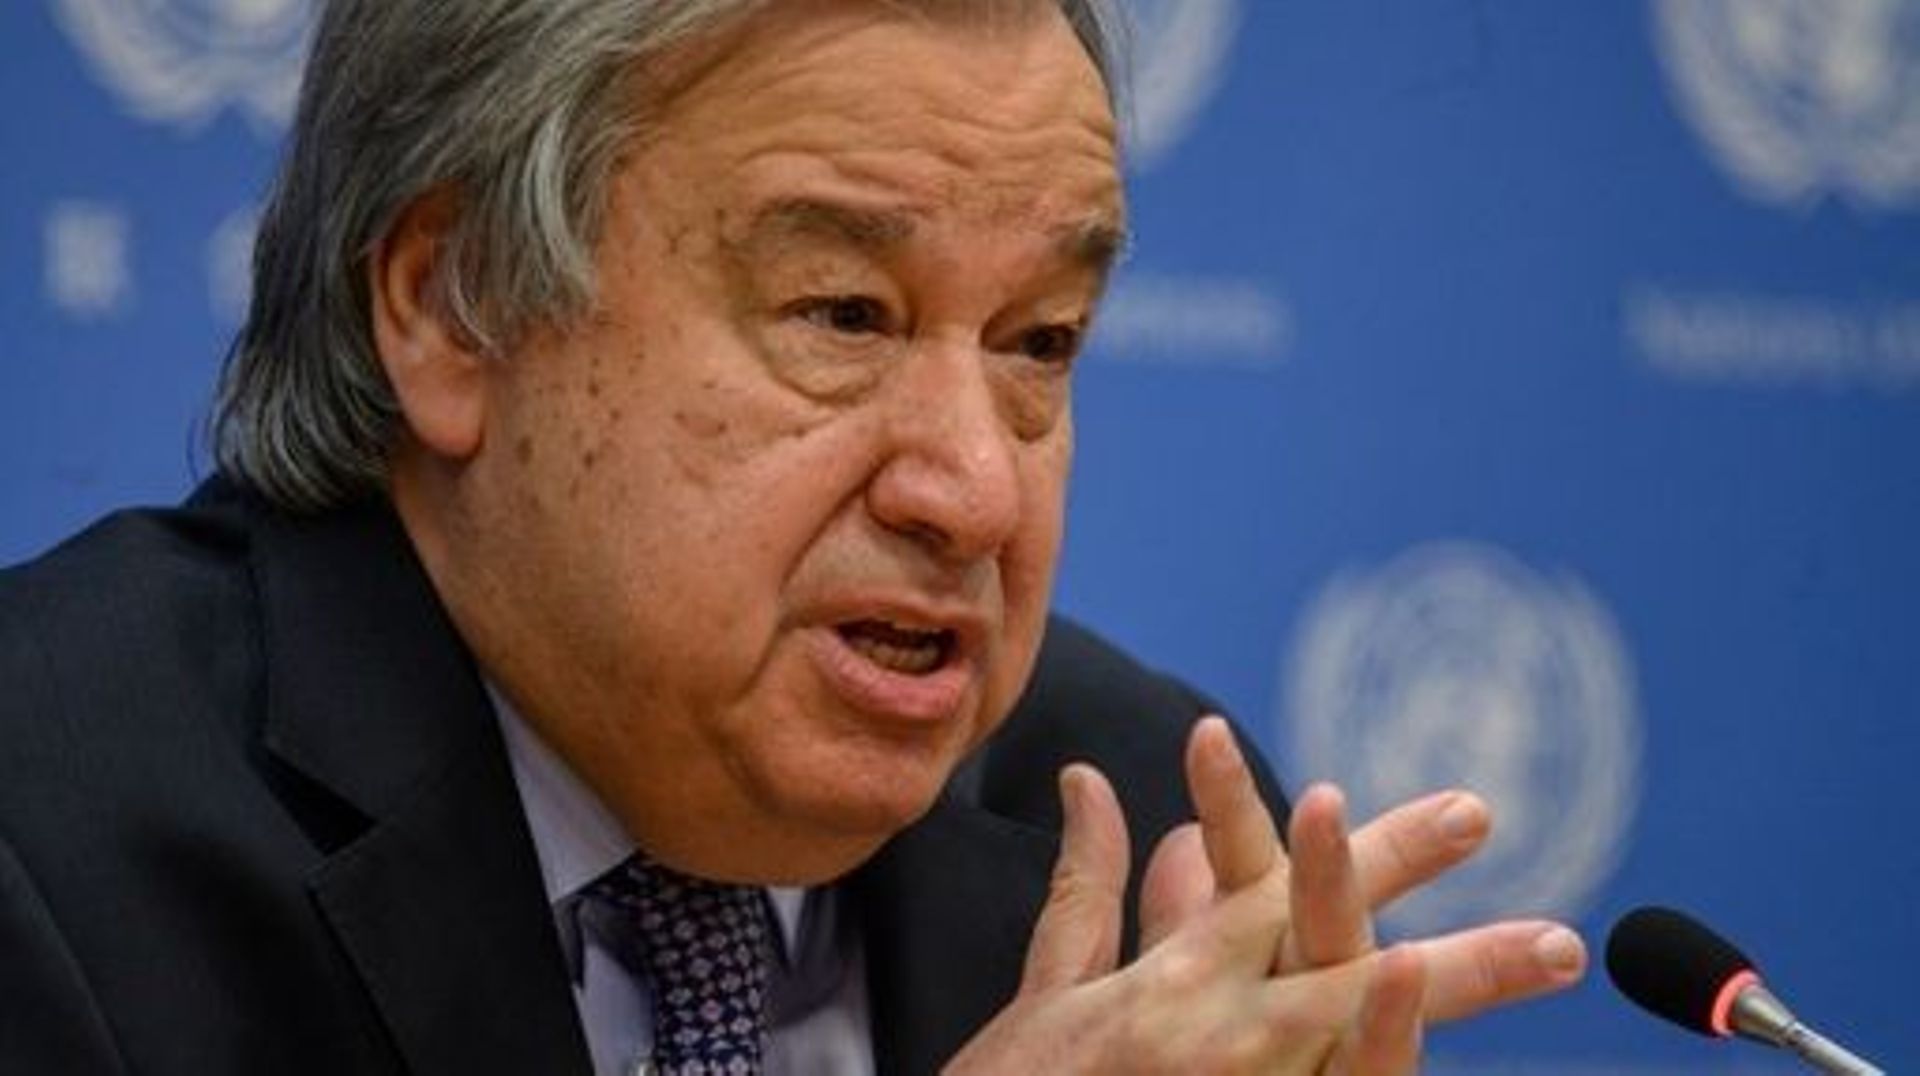 UN Secretary-General Antonio Guterres delivers remarks during the End of Year Press Conference at the UN headquarters in New York City on December 19, 2022. Ed JONES / AFP